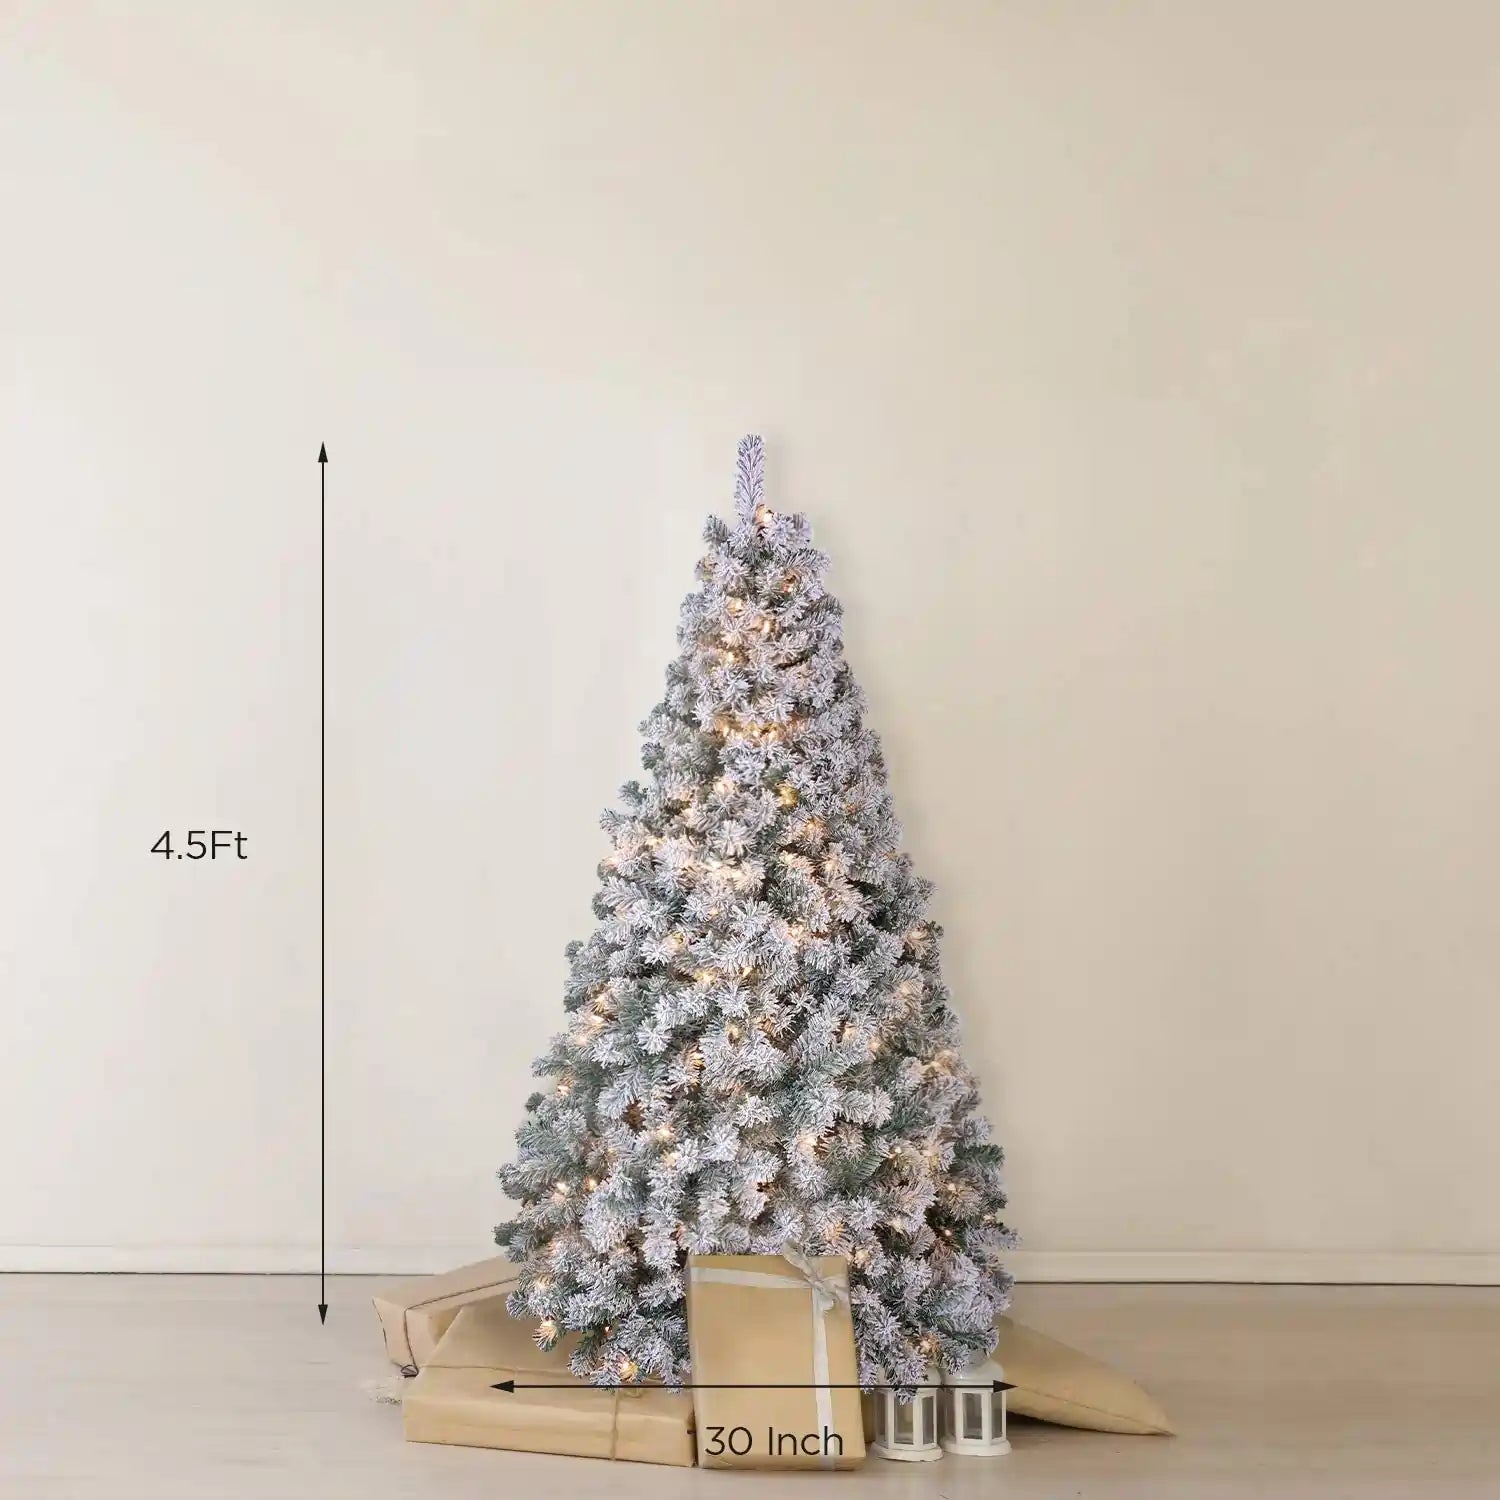 OasisCraft 4.5ft Snow Flocked Christmas Tree Size#size_4.5FT